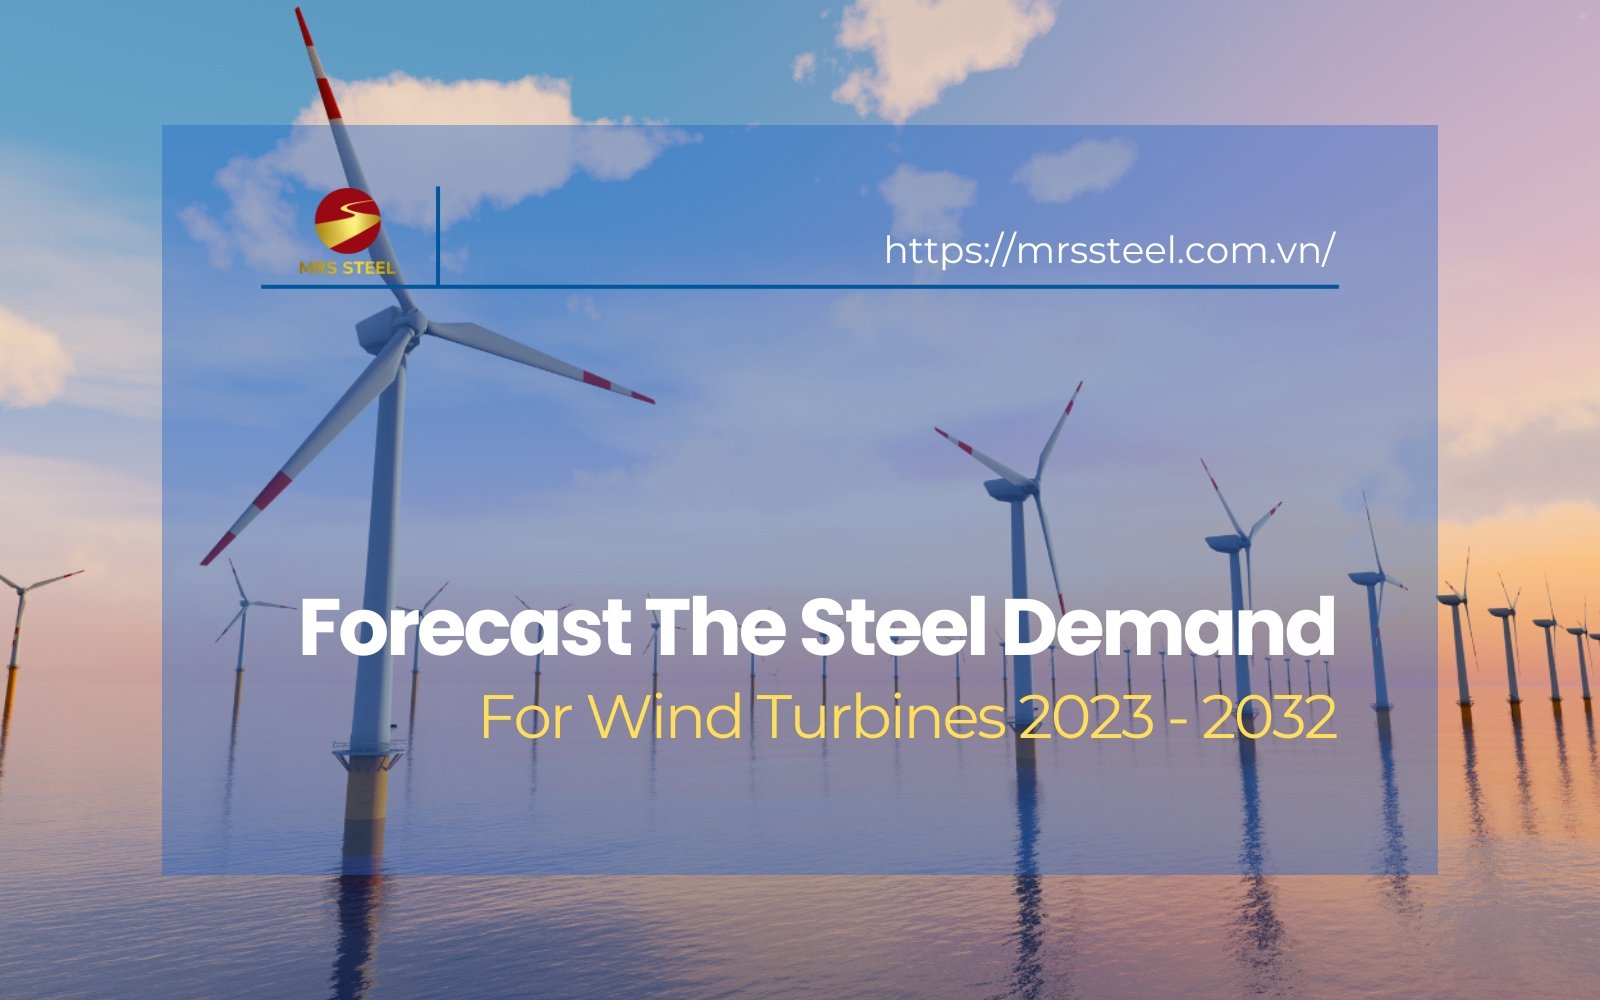 Forecasting the growth of steel demand for wind turbines from 2023 to 2032